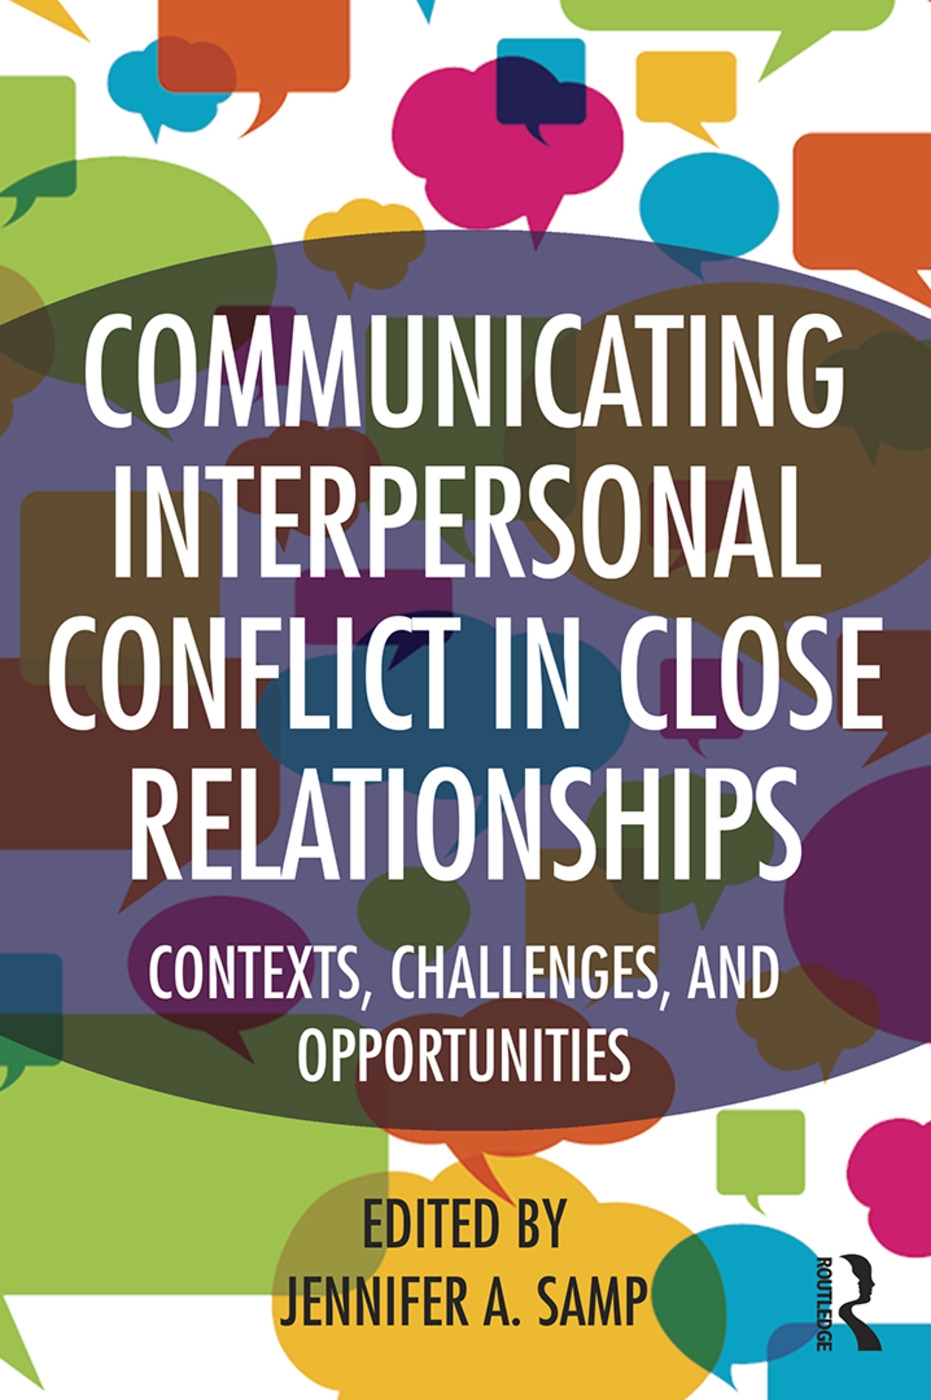 Communicating Interpersonal Conflict in Close Relationships: Contexts, Challenges, and Opportunities